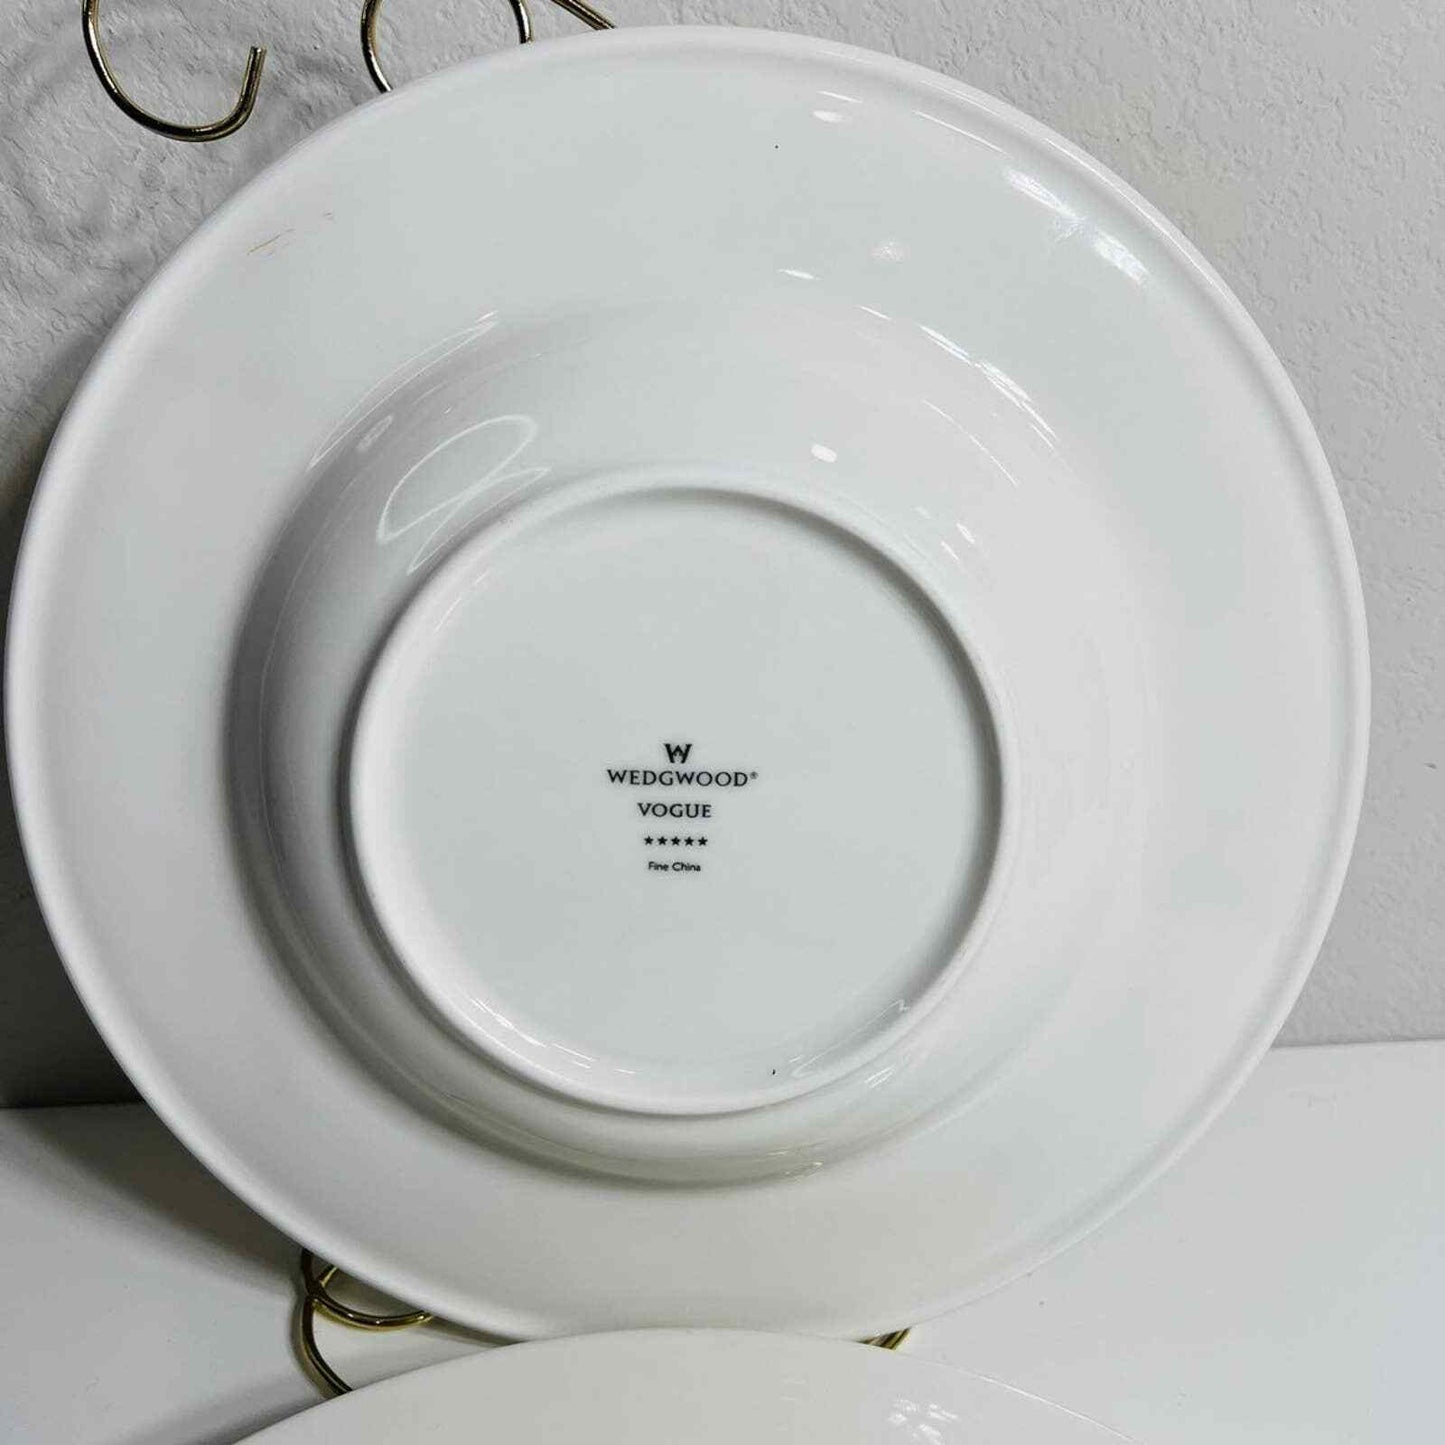 Wedgwood Serving Plates Bowls Vogue Fine China Hotel Dining White Dishes England